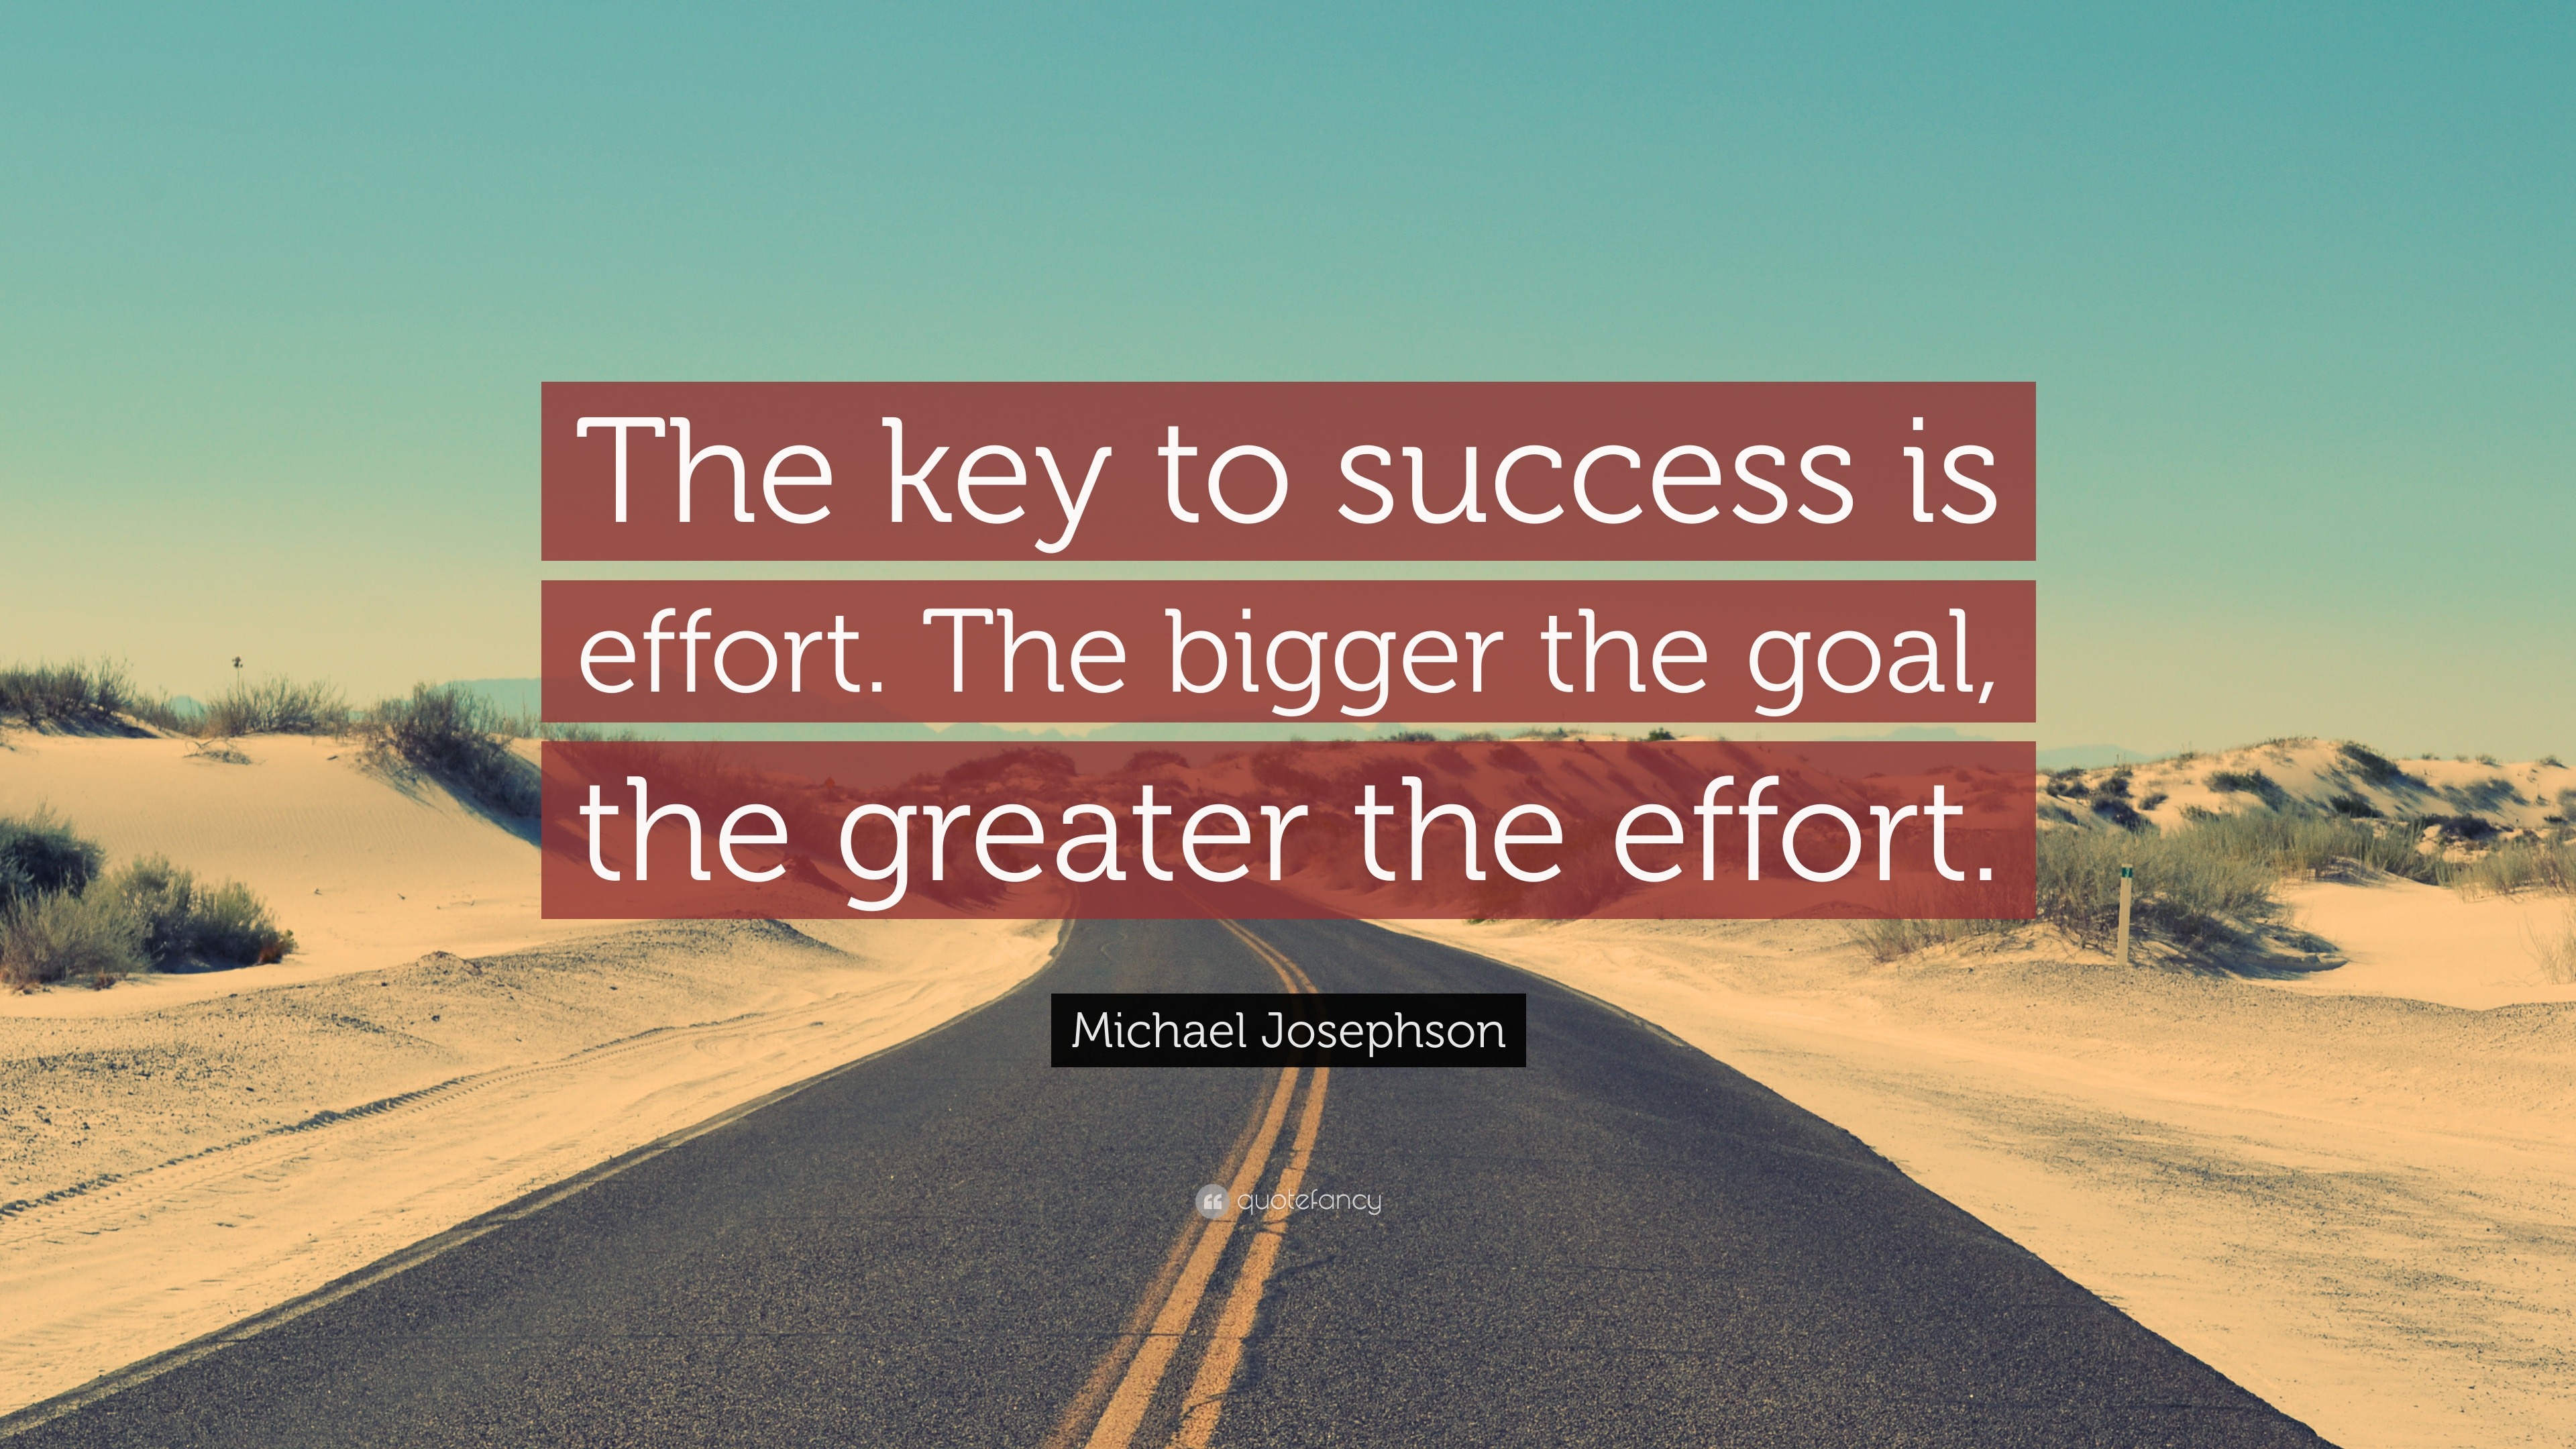 Michael Josephson Quote: “The key to success is effort. The bigger the